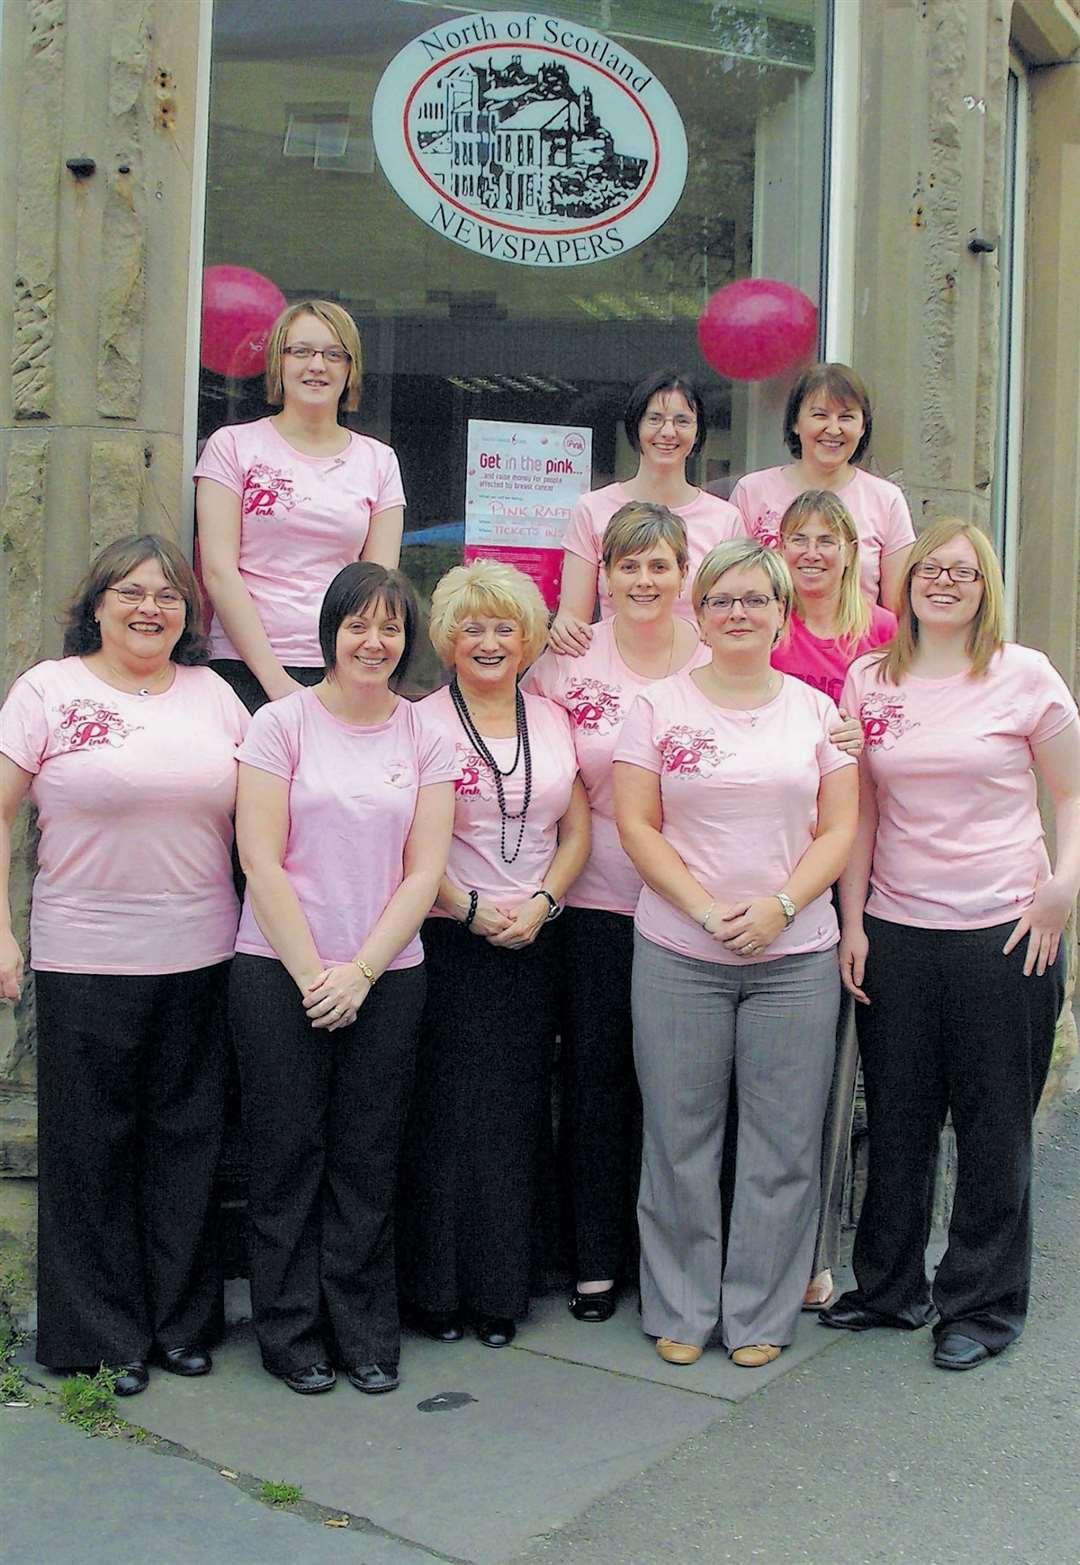 Sheona (left) and colleagues supporting Breast Cancer Awareness Month in 2007.